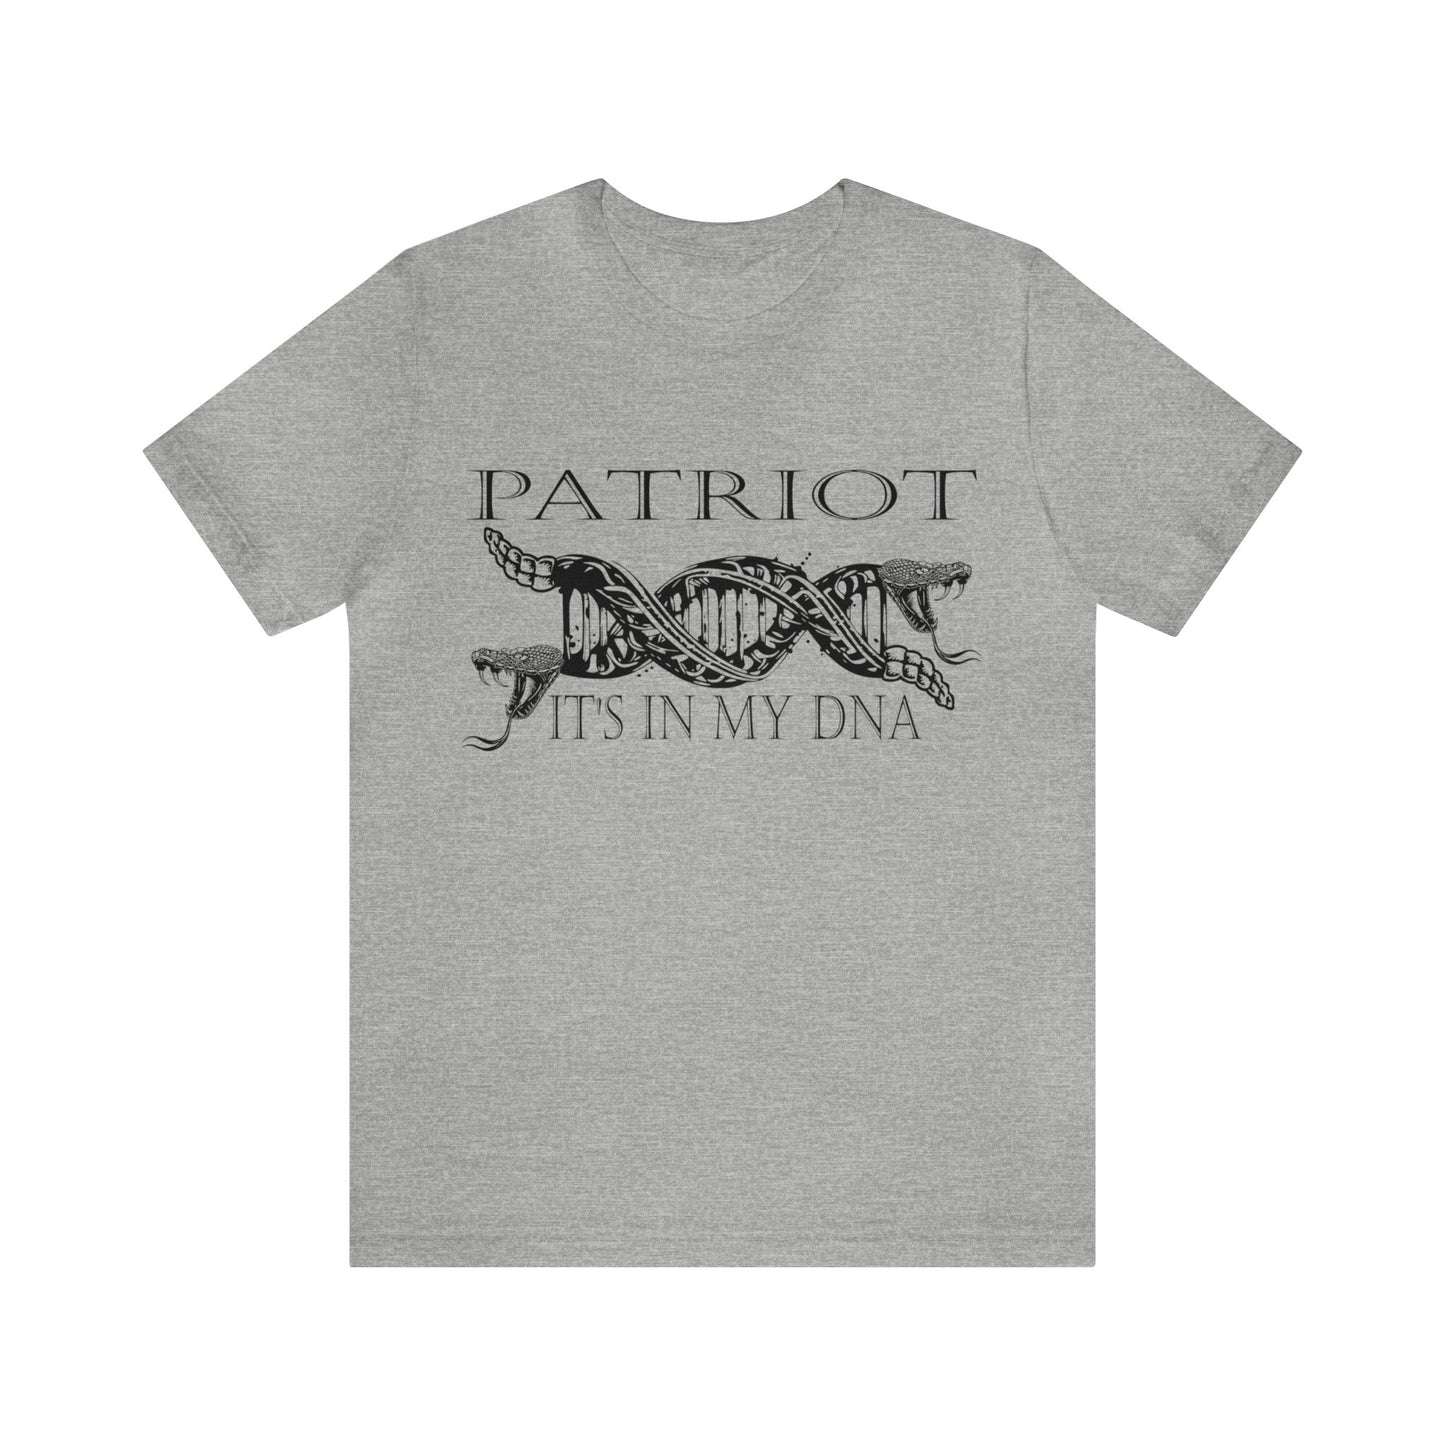 Patriot DNA T-Shirt, DNA strand shirt, American shirt, Gift for him, father's day shirt, gift for her